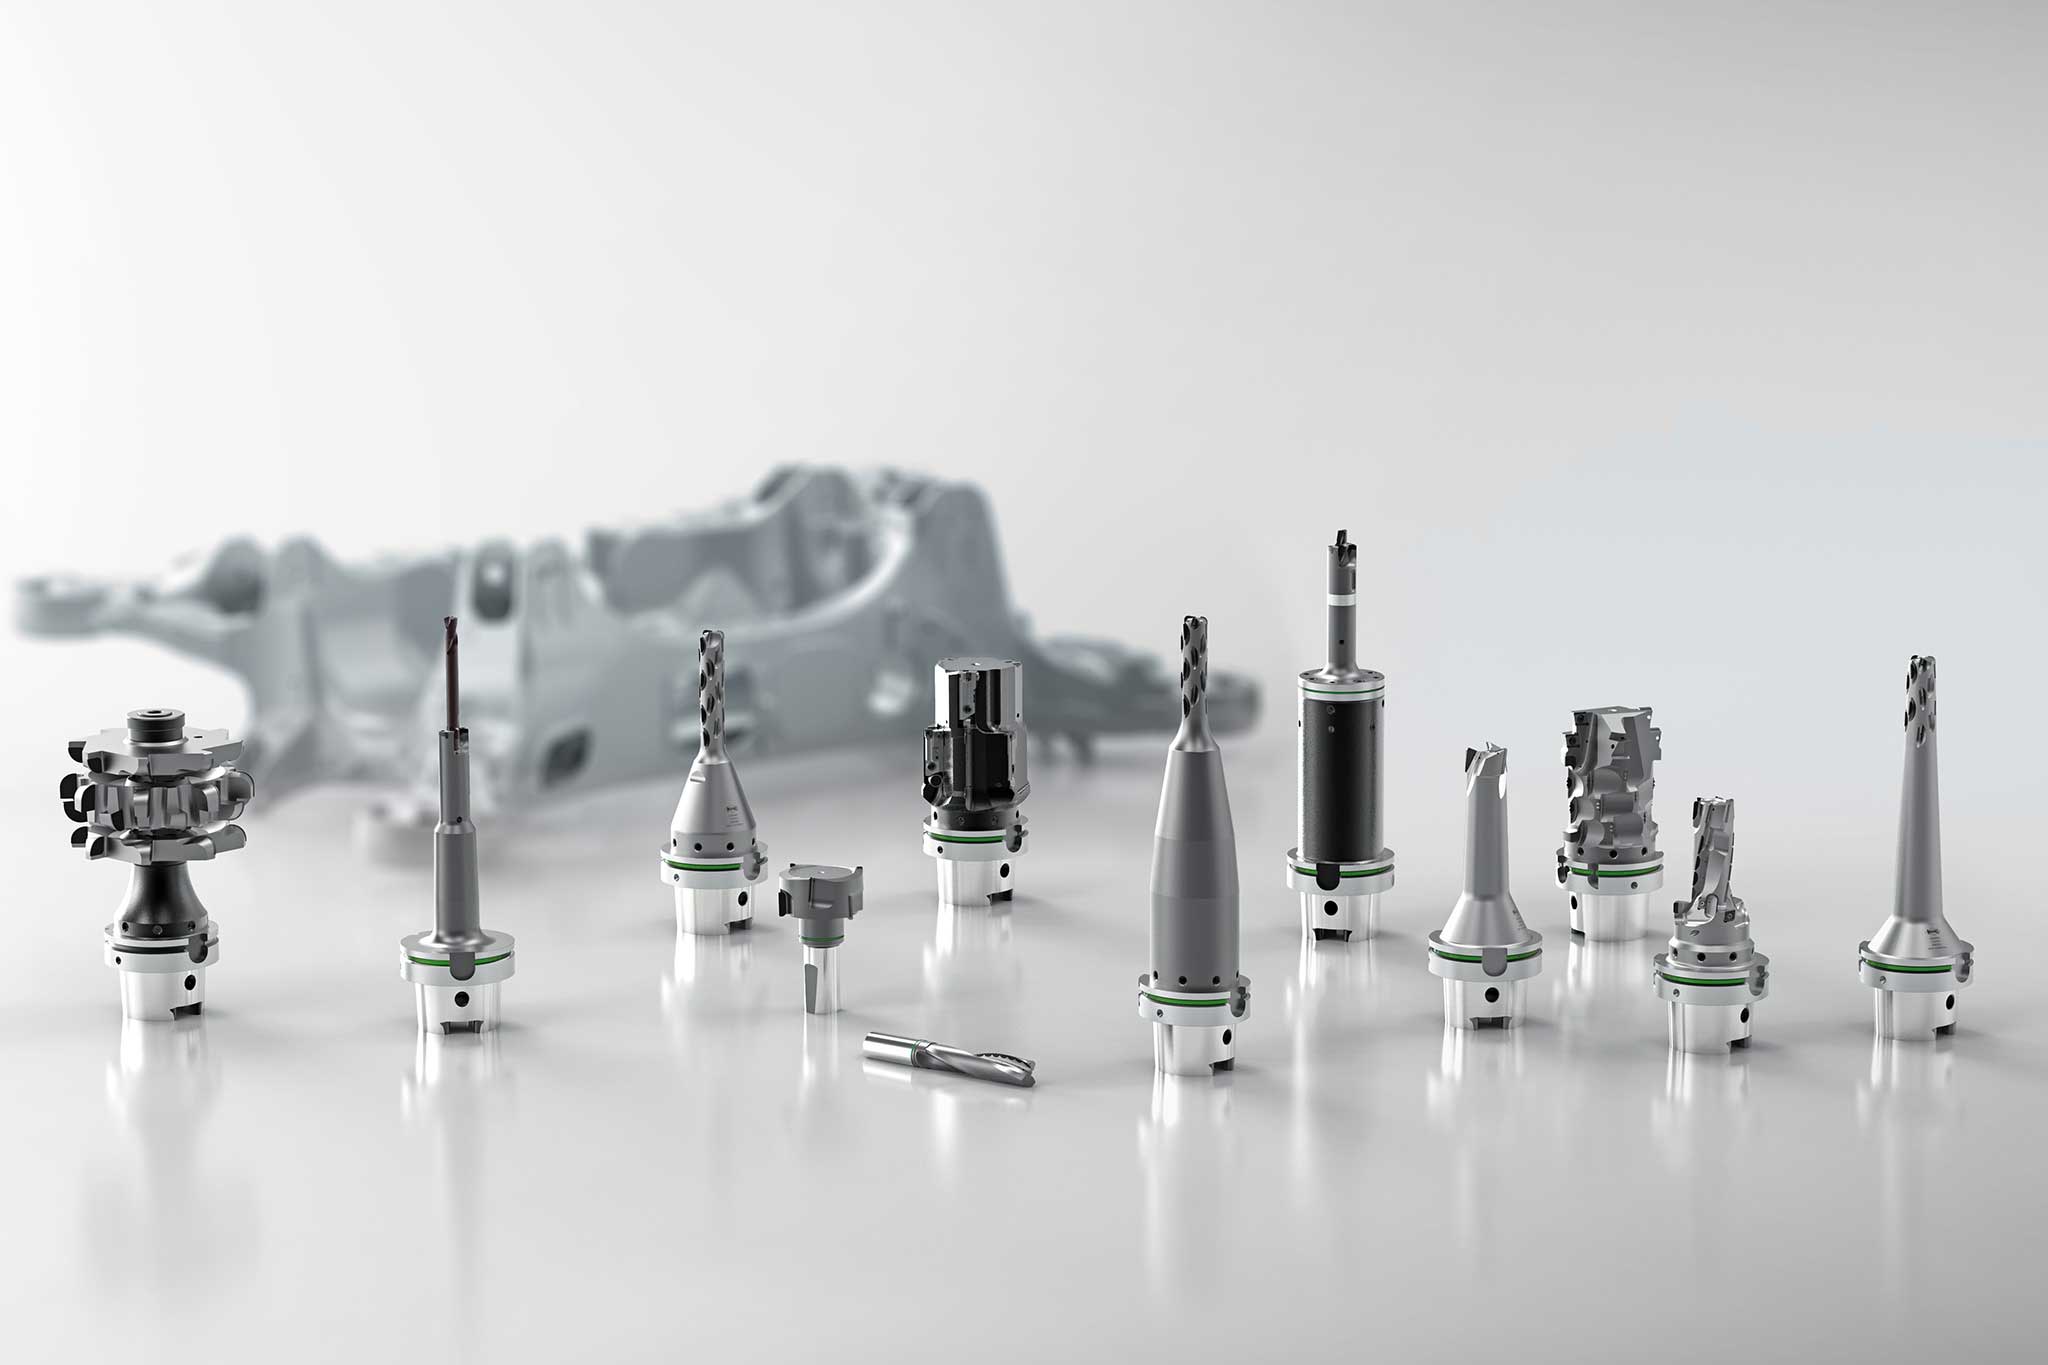 Twelve tools for complete machining are placed in front of a structural part, which is shown as blurred in the background.